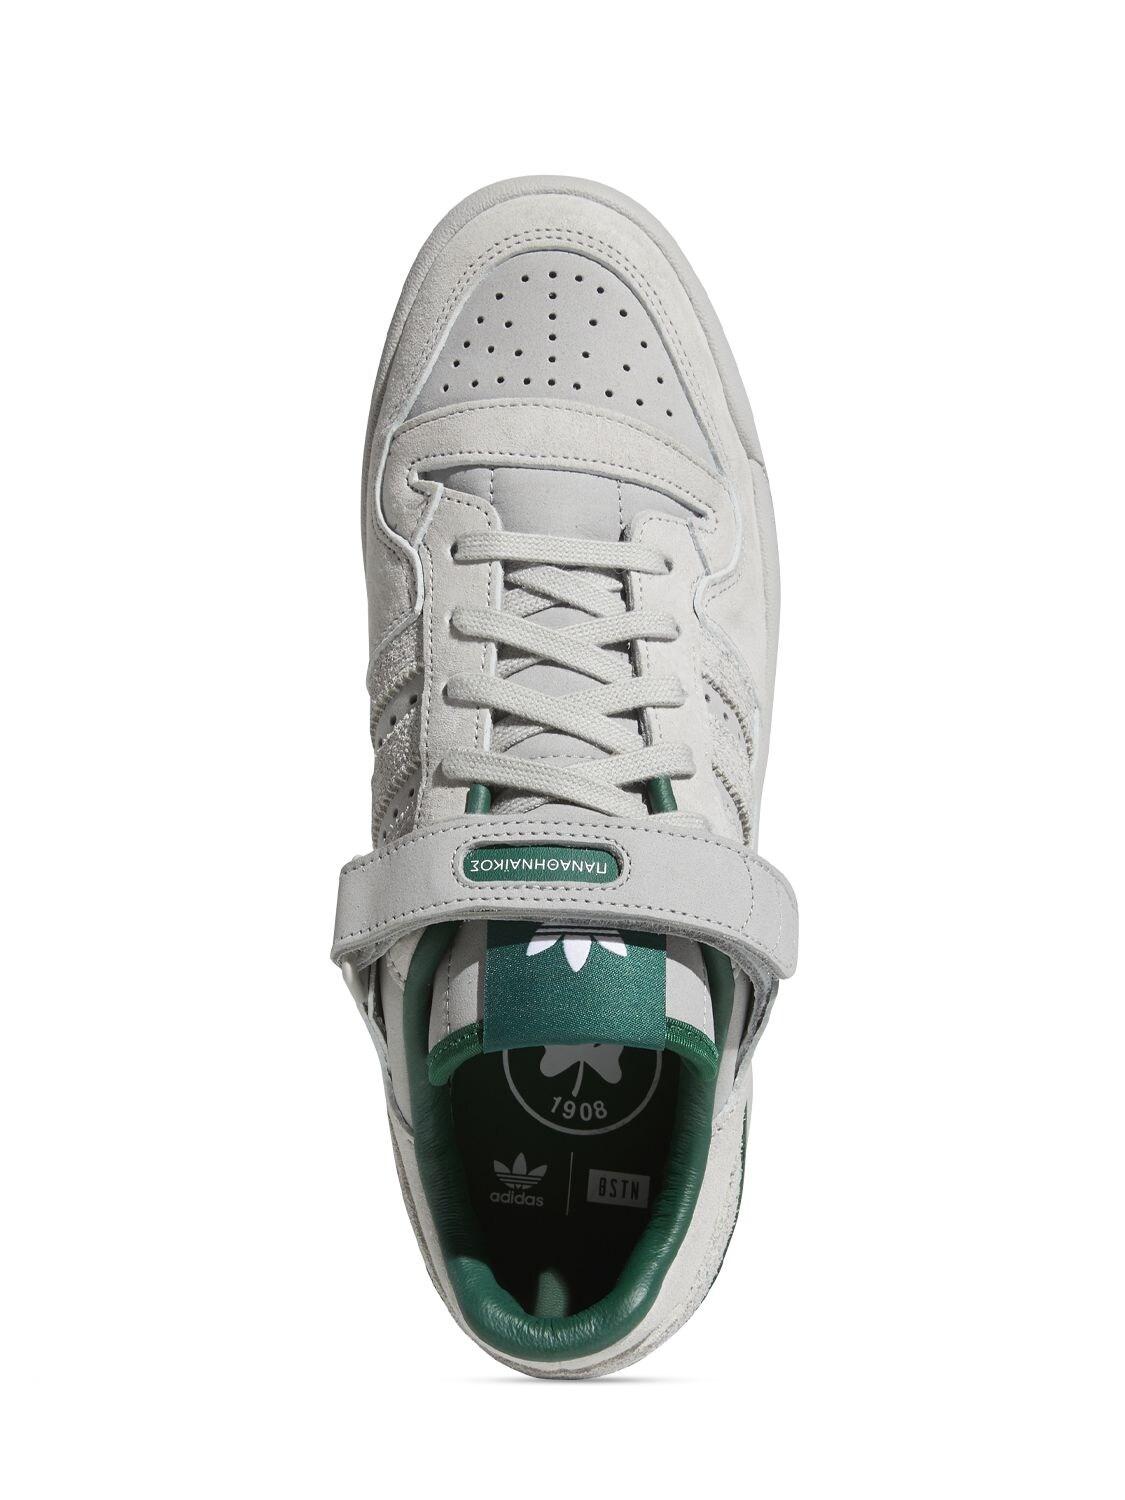 adidas Originals Bstn X Panathinaikos Forum 84 Sneakers in Grey Two (White)  for Men | Lyst